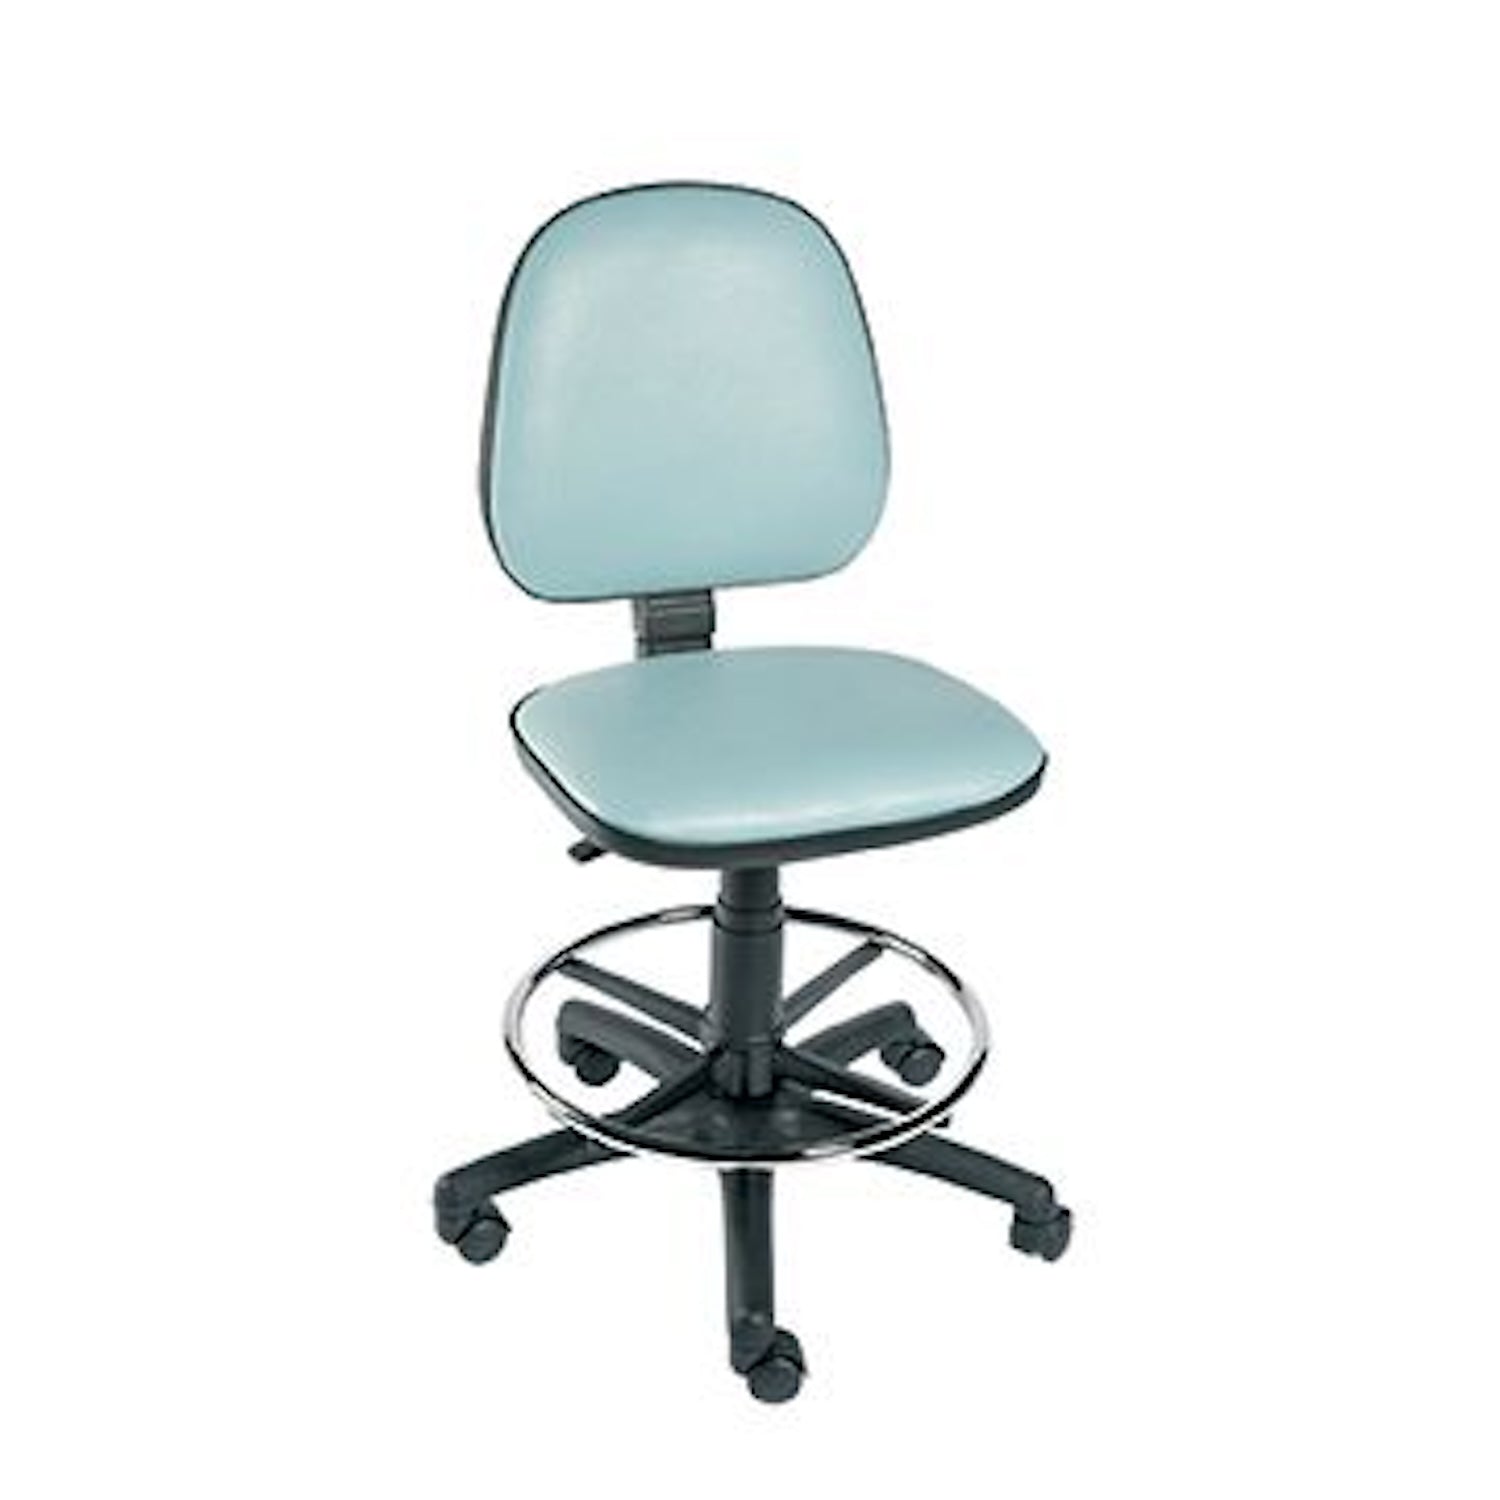 Sunflower Gas-Lift Chair with Foot Ring & Sunflower Gas-Lift Chair With Foot Ring in Black